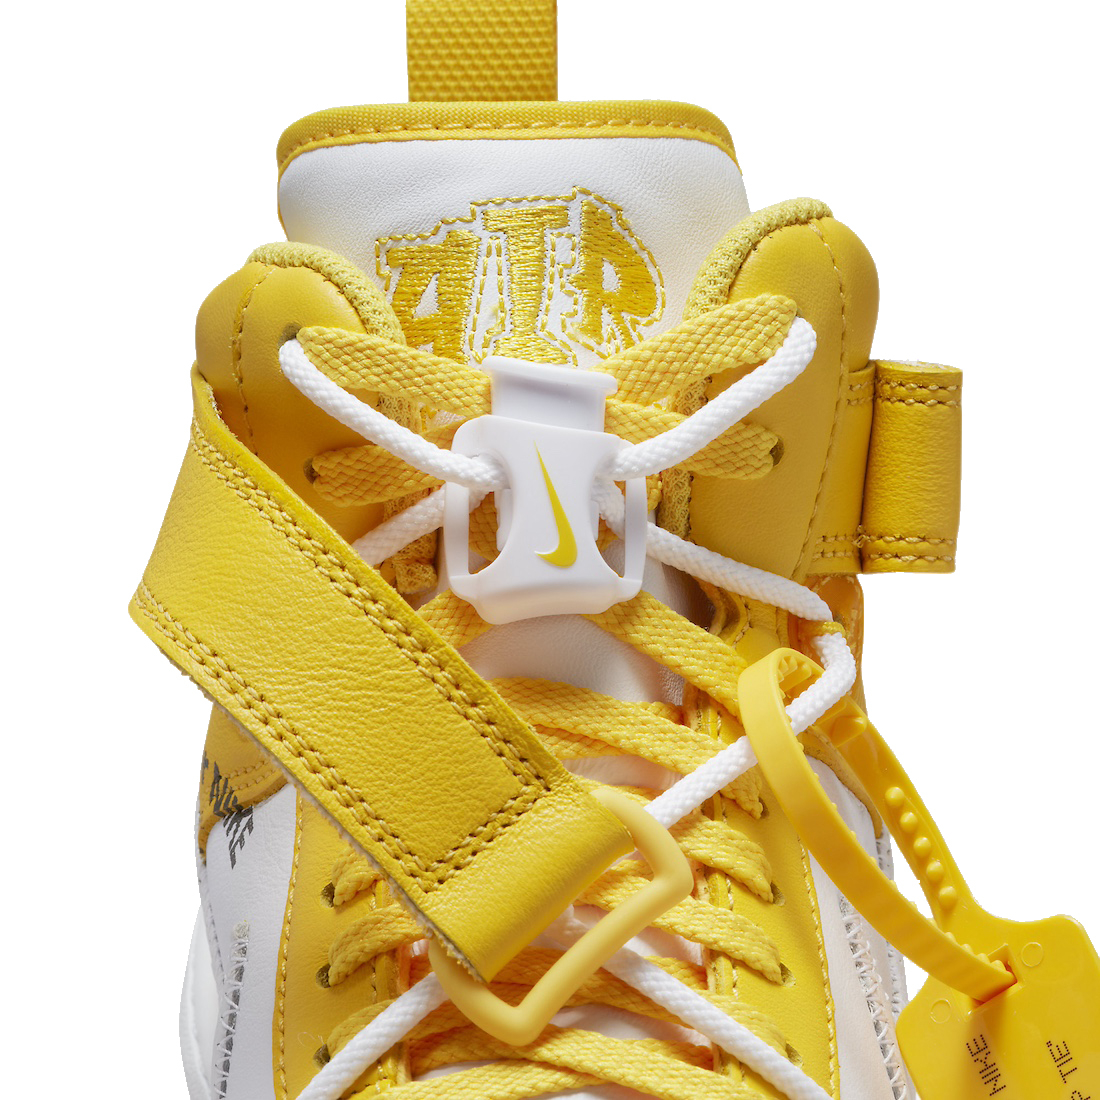 Off-White x Nike Air Force 1 Mid Varsity Maize DR0500-101